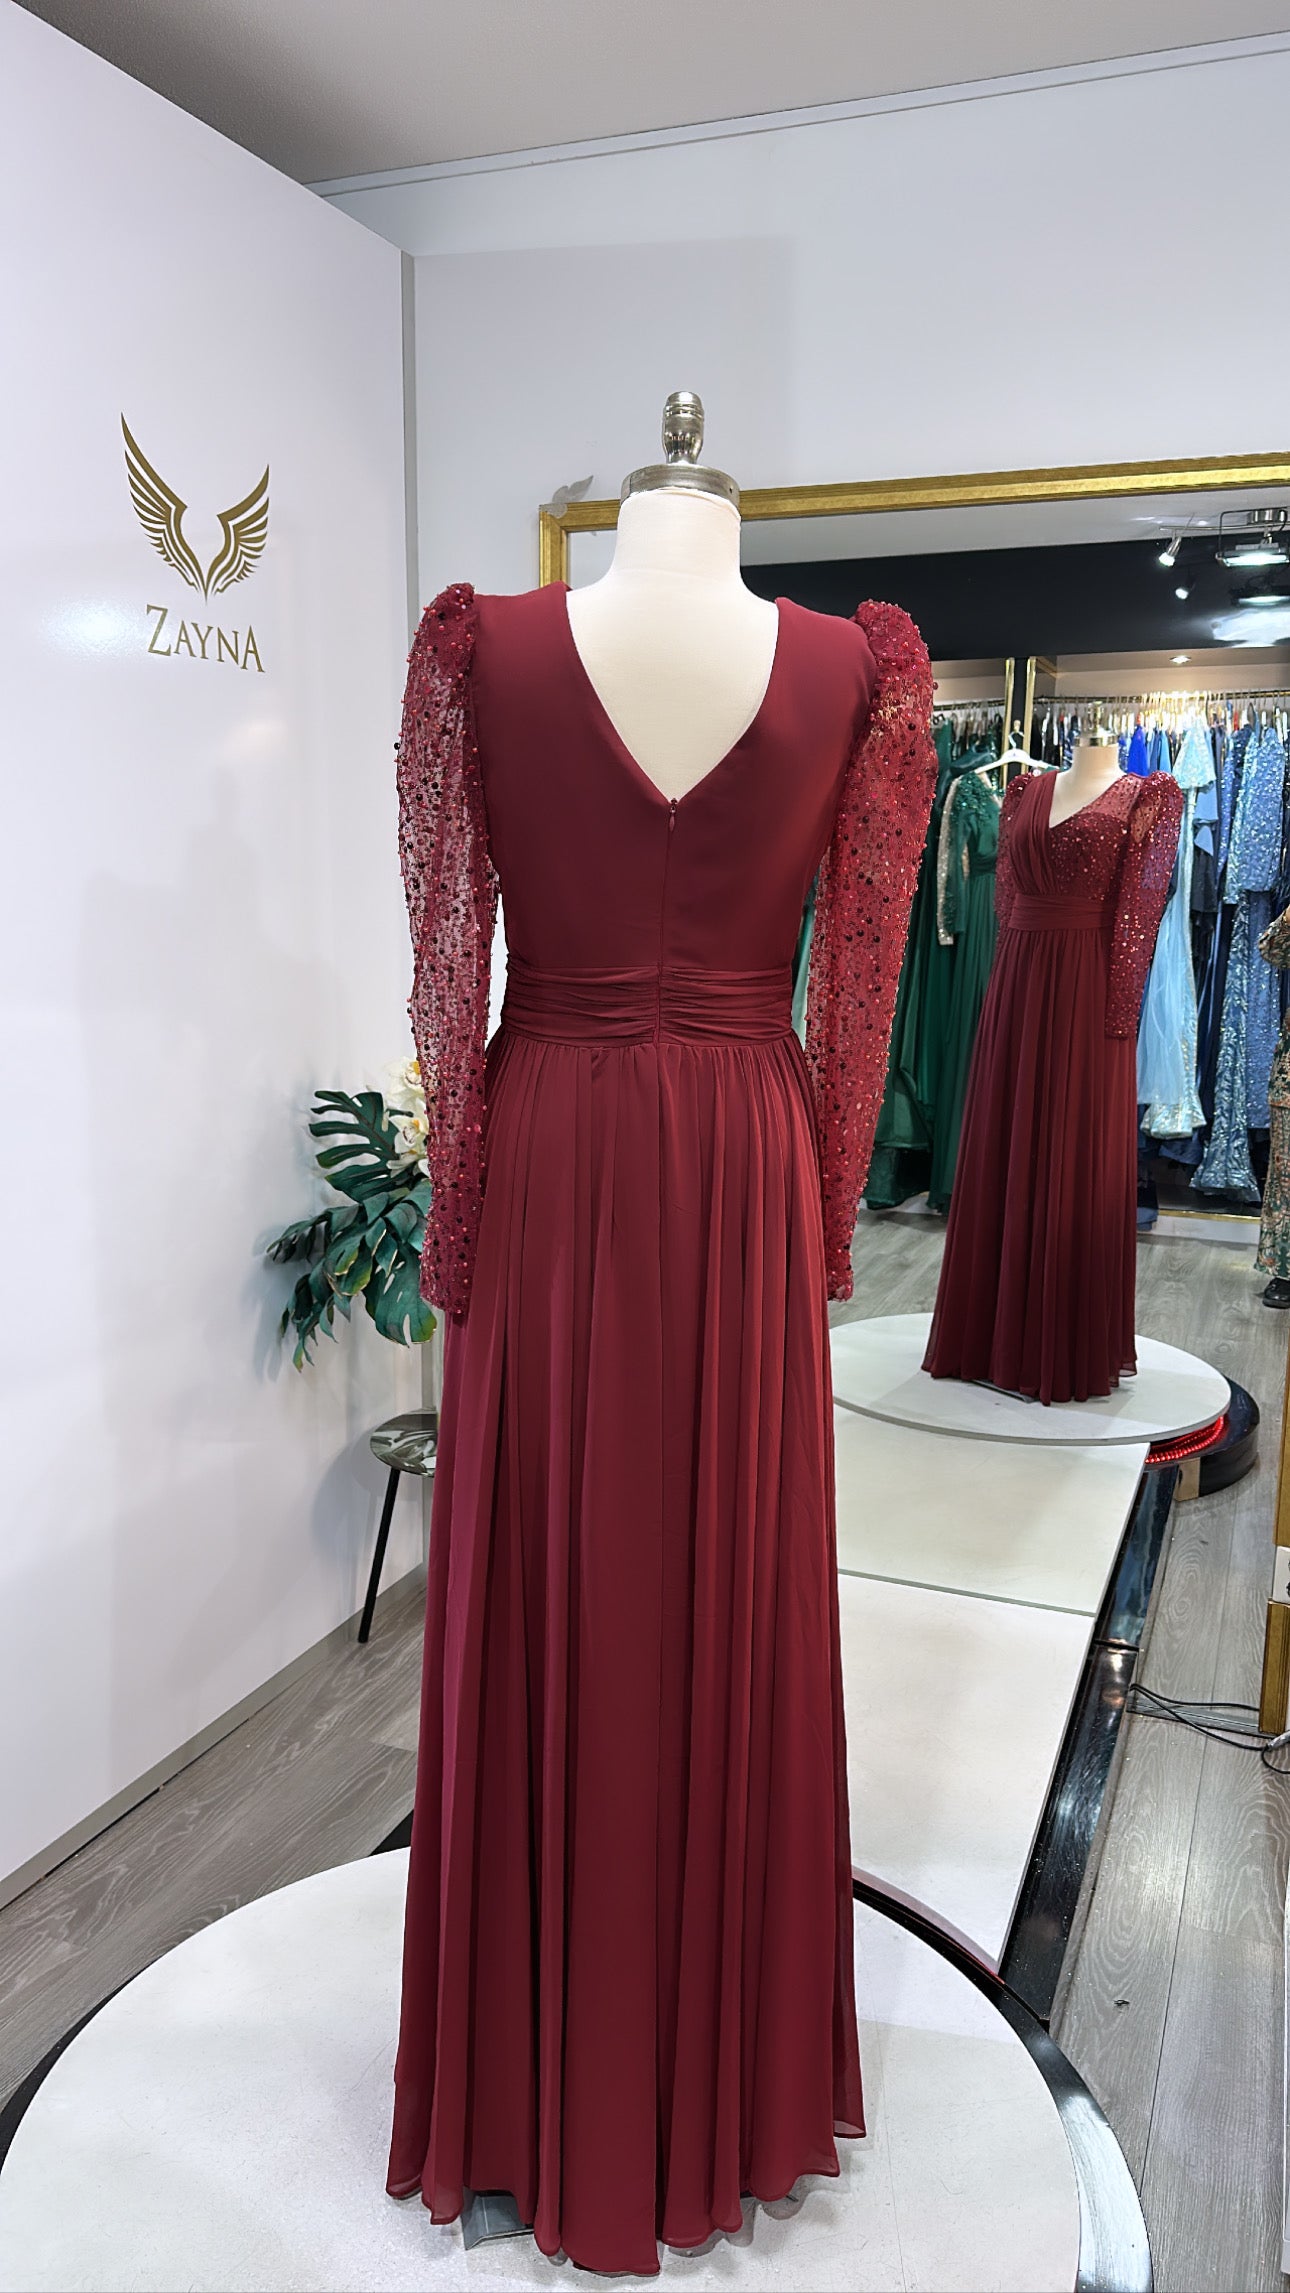 Elegant bordo dress with sequins and crepe fabric